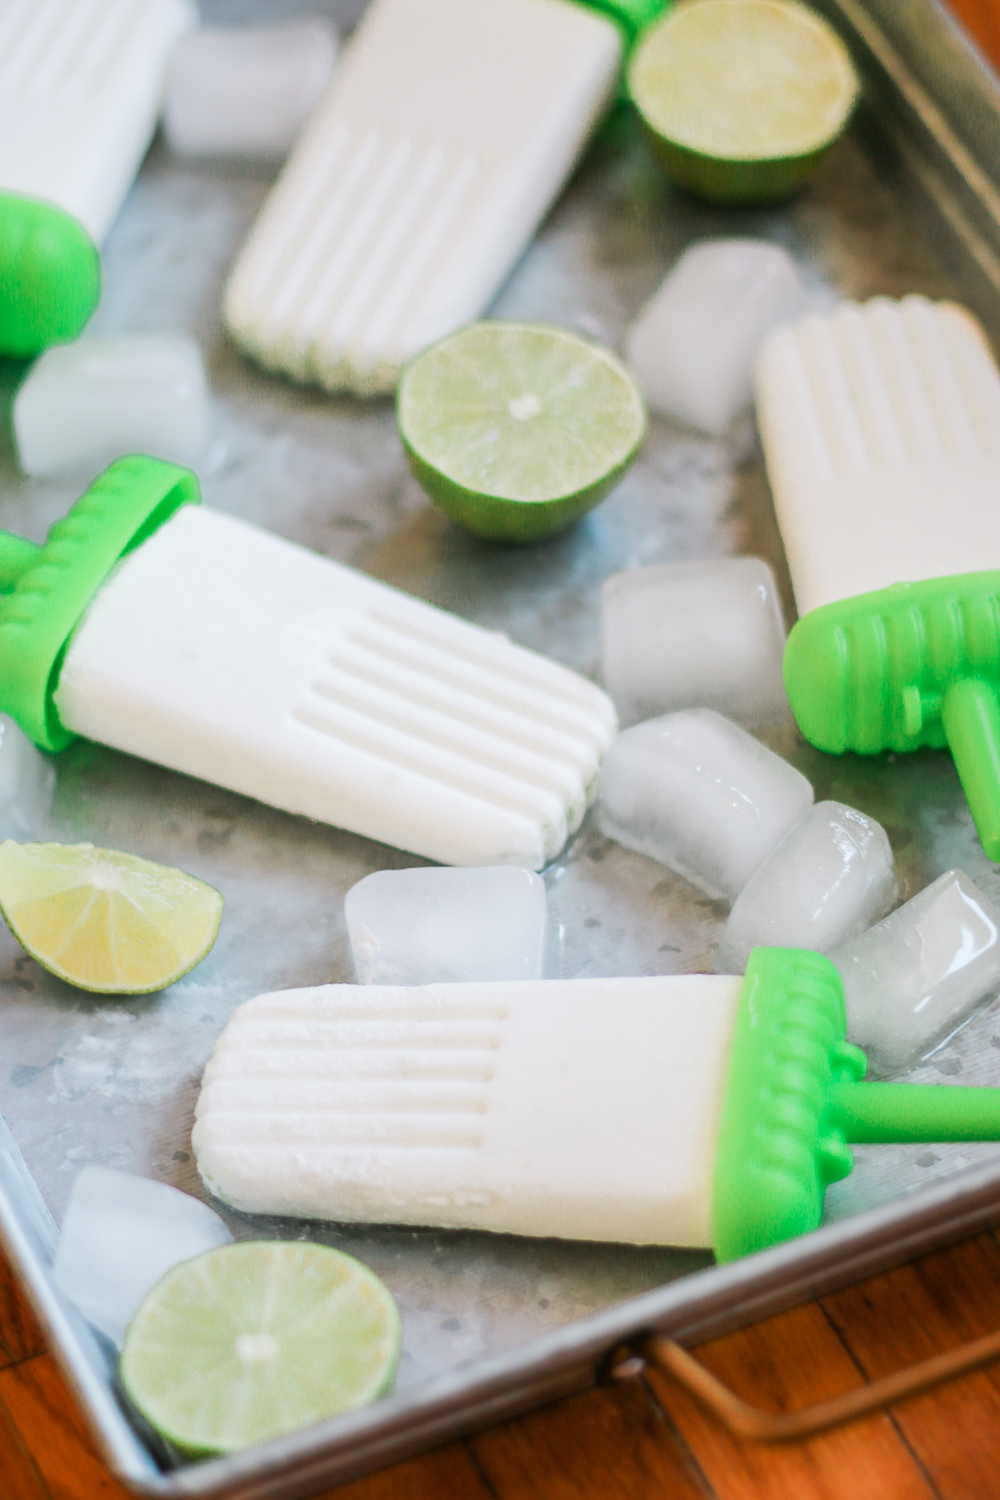 Blogger Stephanie Ziajka shows how to make alcoholic popsicles with coconut milk and Malibu Rum on Diary of a Debutante